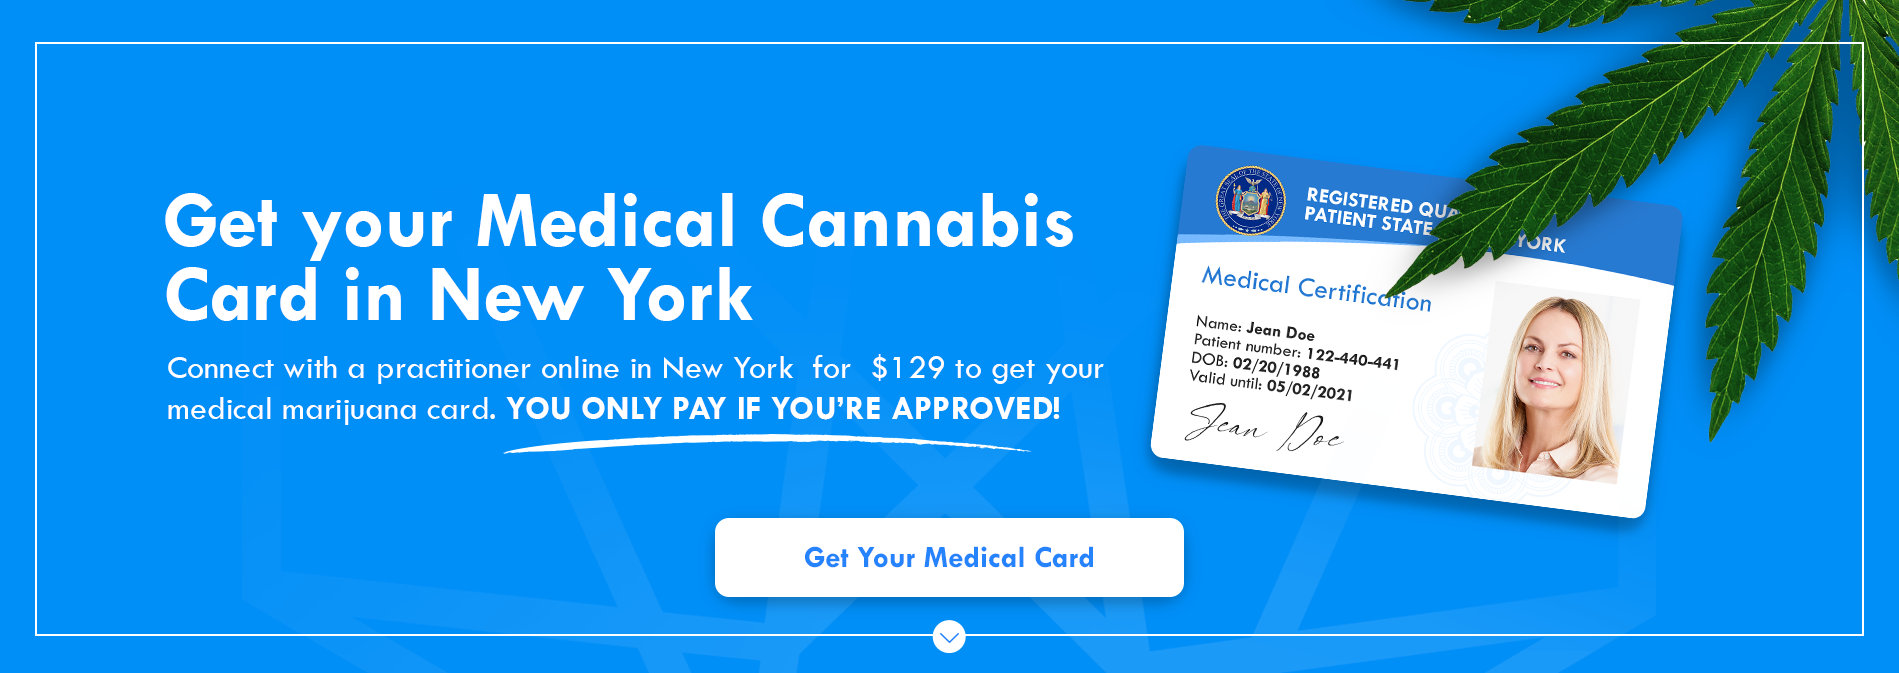 Get your Medical Cananbis Card In New York. Connect with a practitioner online in New York for $129 to get your medical merijuana card. You only pay if you're approved.